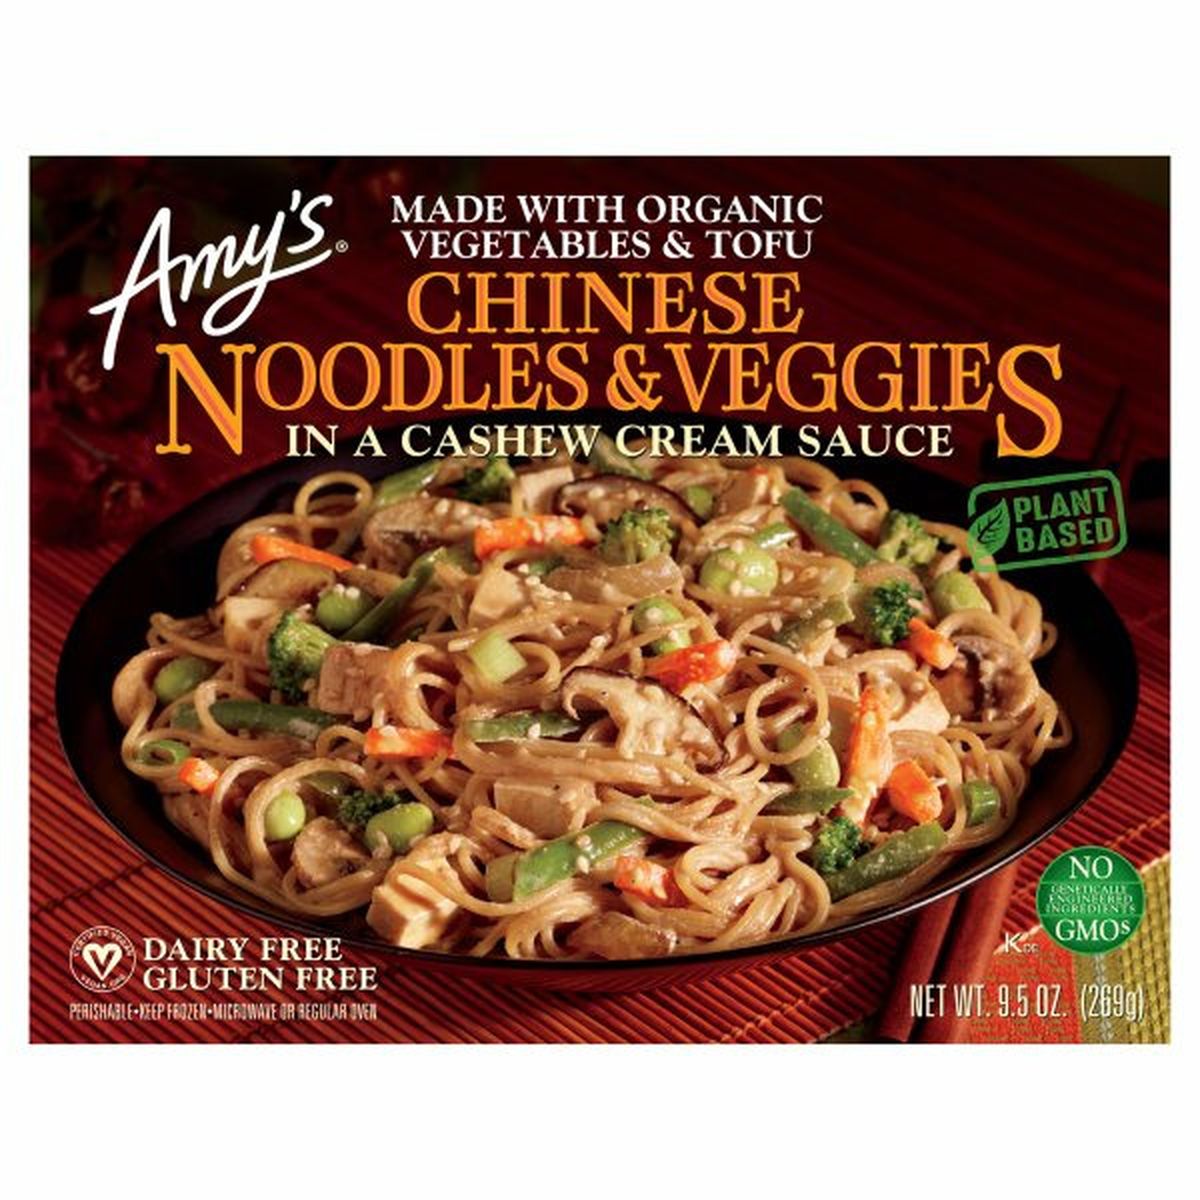 Calories in Amy's Kitchen Chinese Noodles & Veggies in a Cashew Cream Sauce